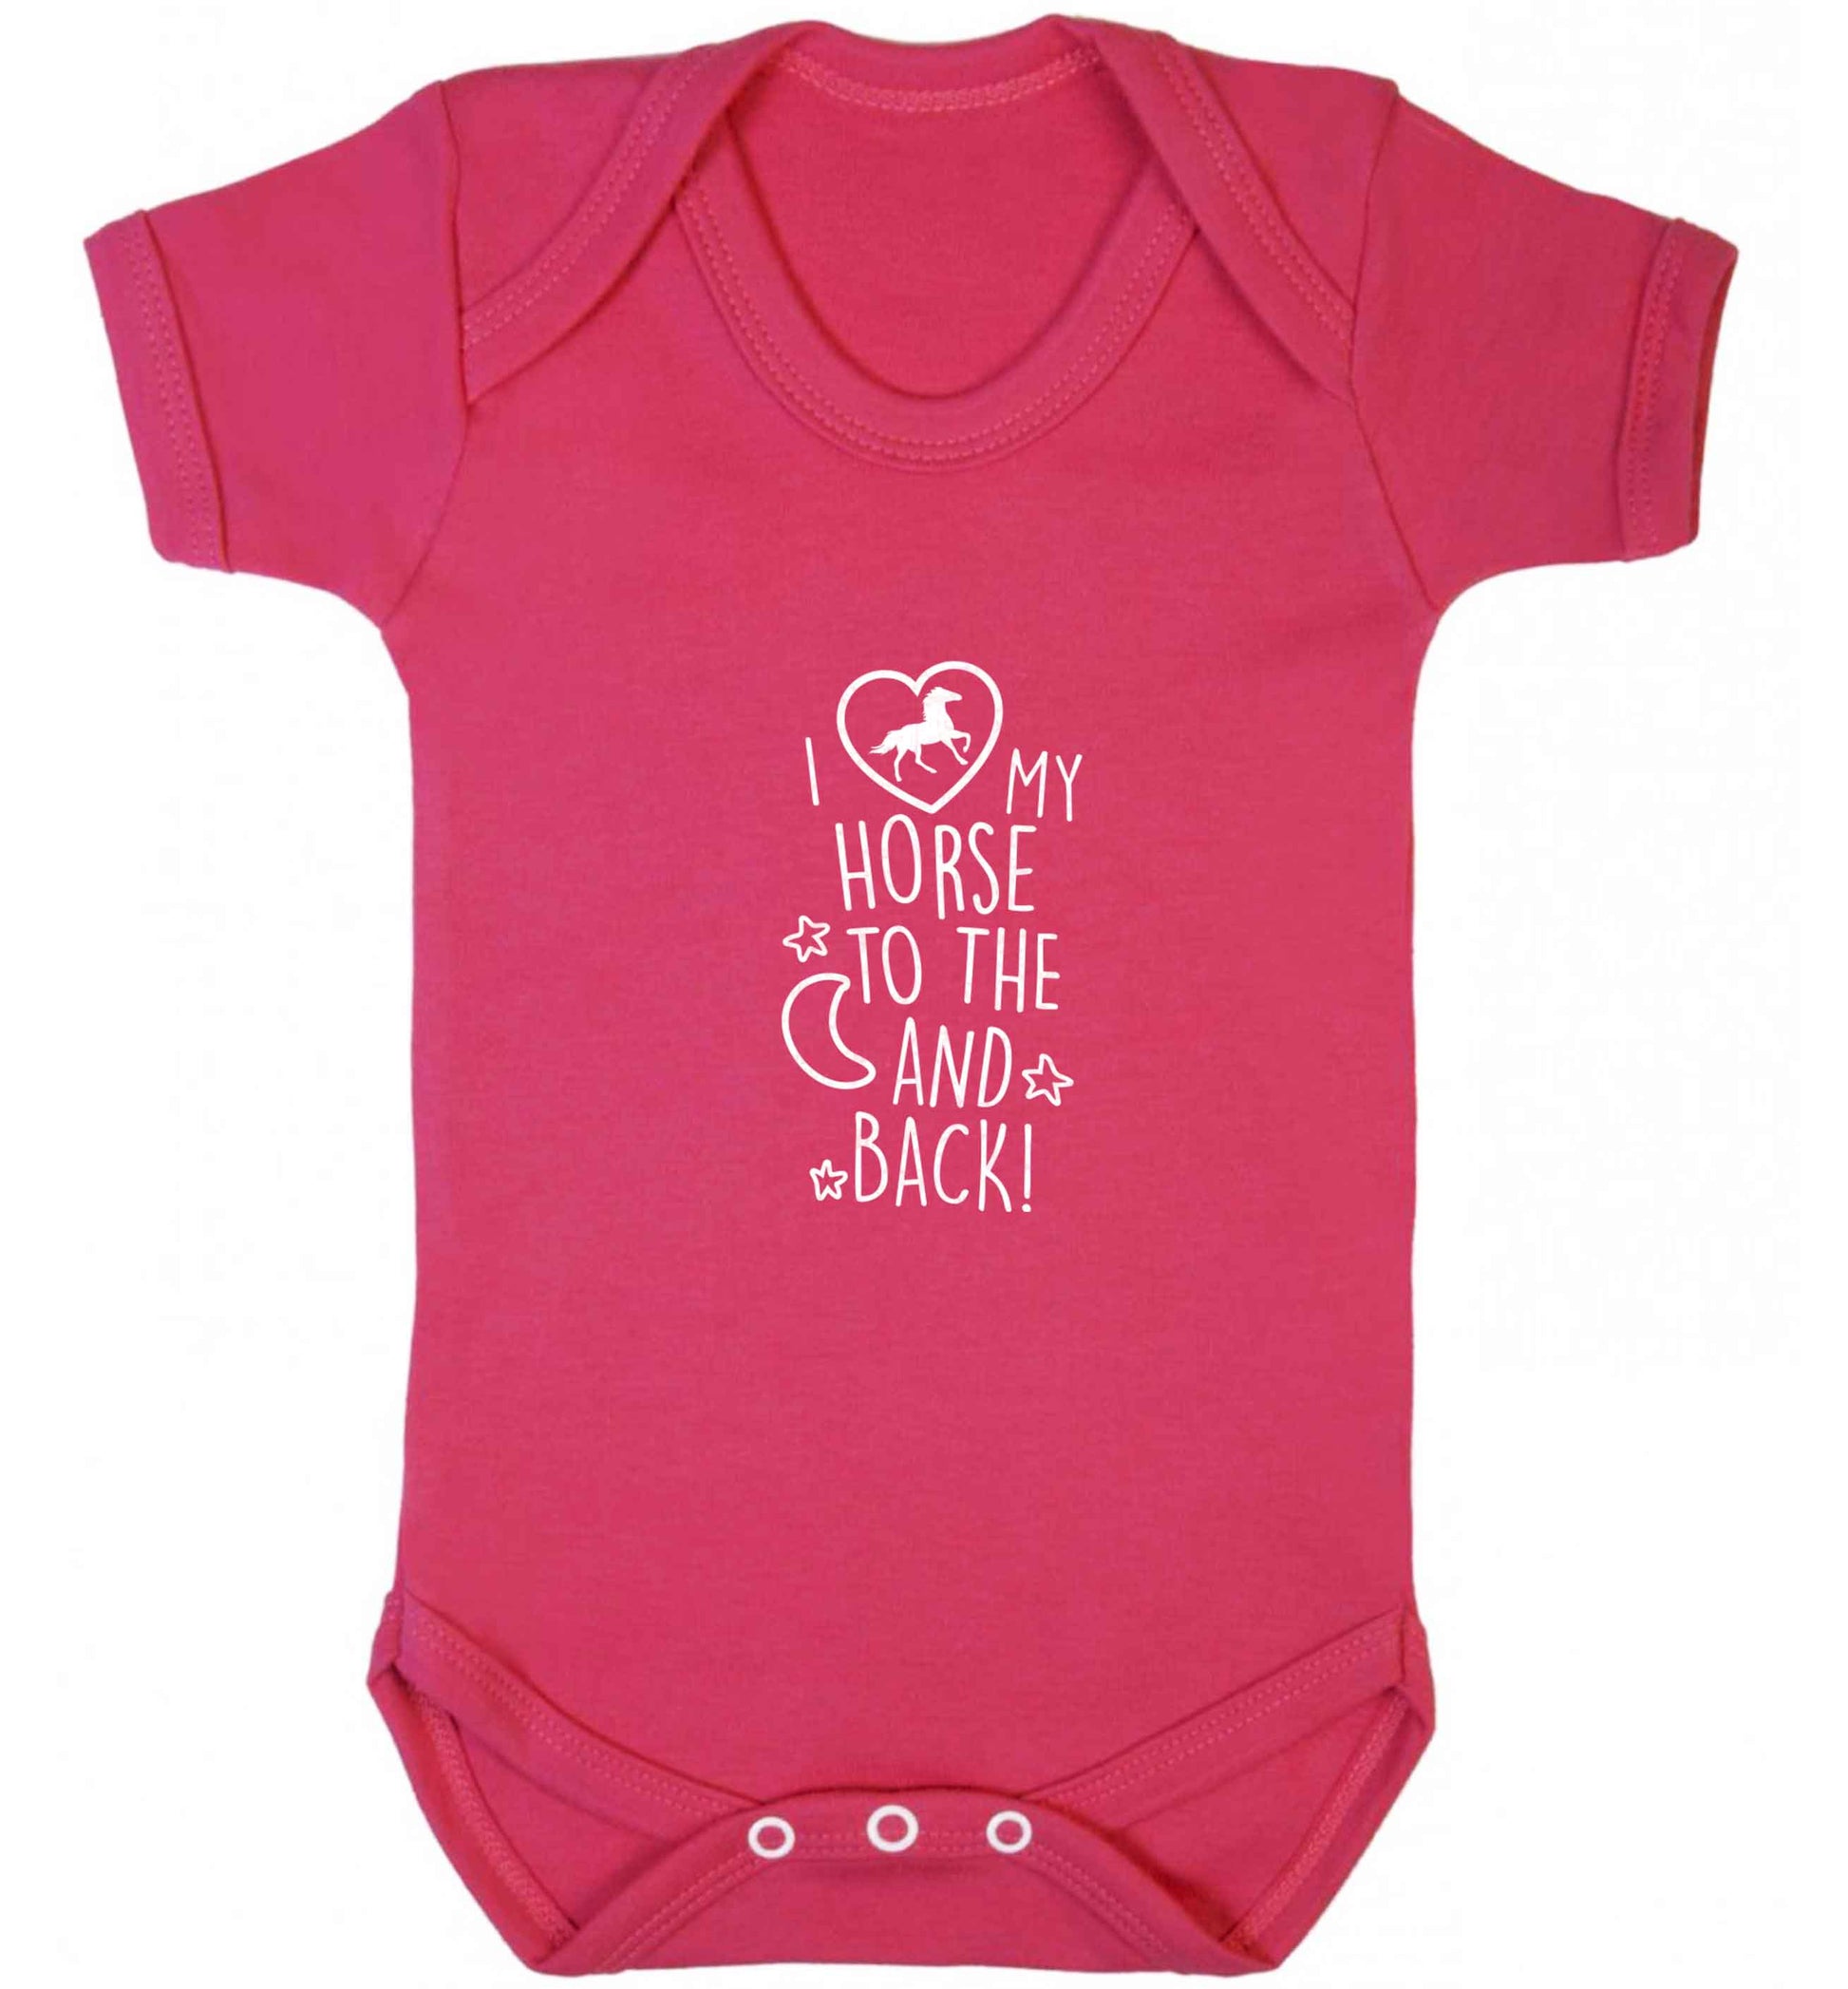 I love my horse to the moon and back baby vest dark pink 18-24 months